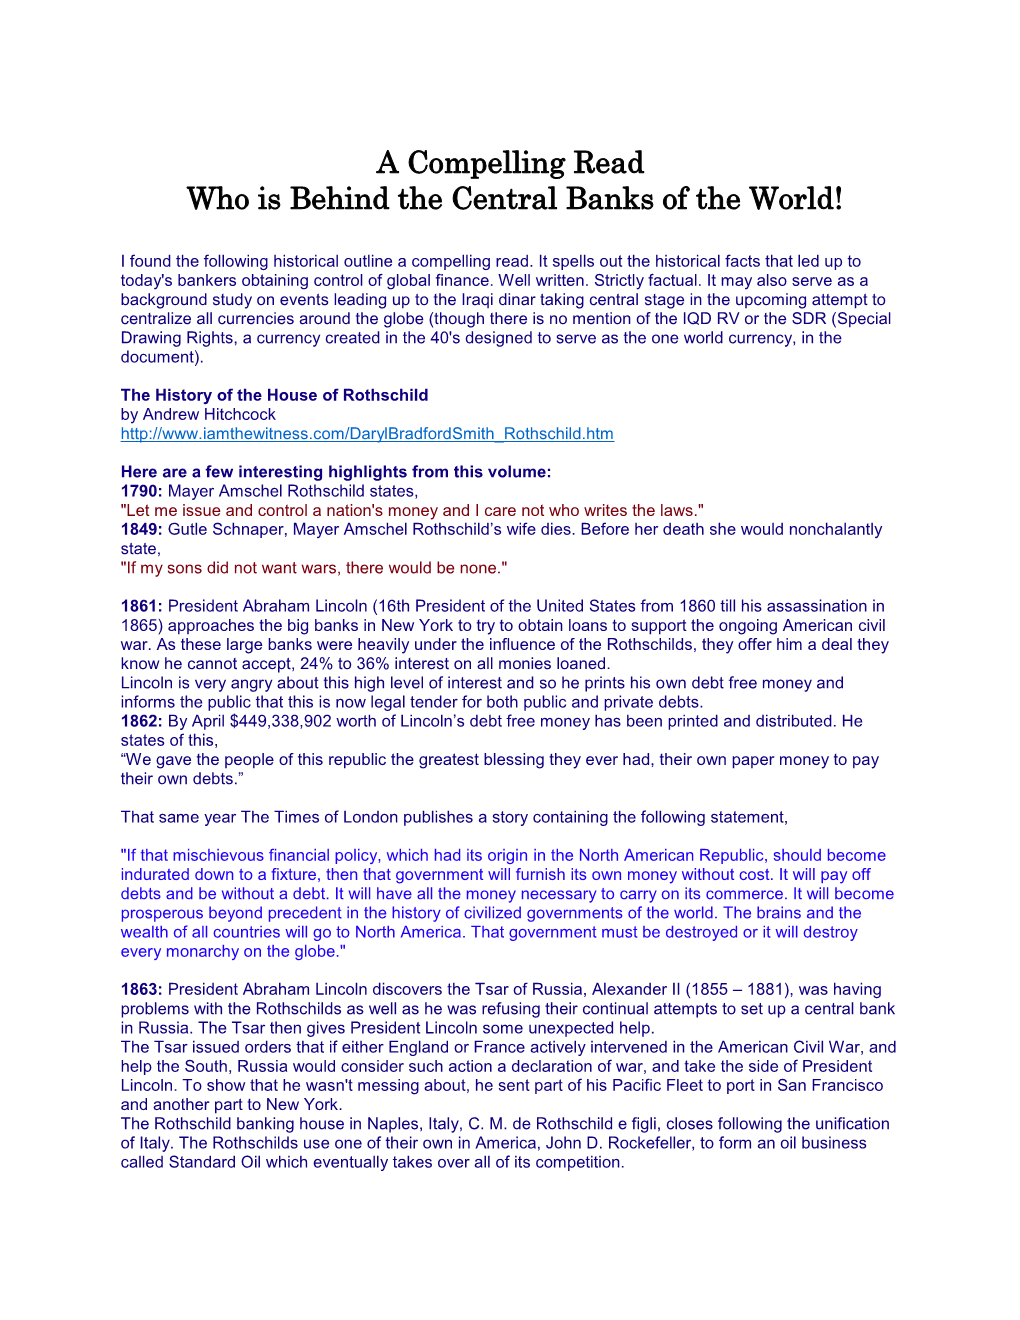 A Compelling Read Who Is Behind the Central Banks of the World!